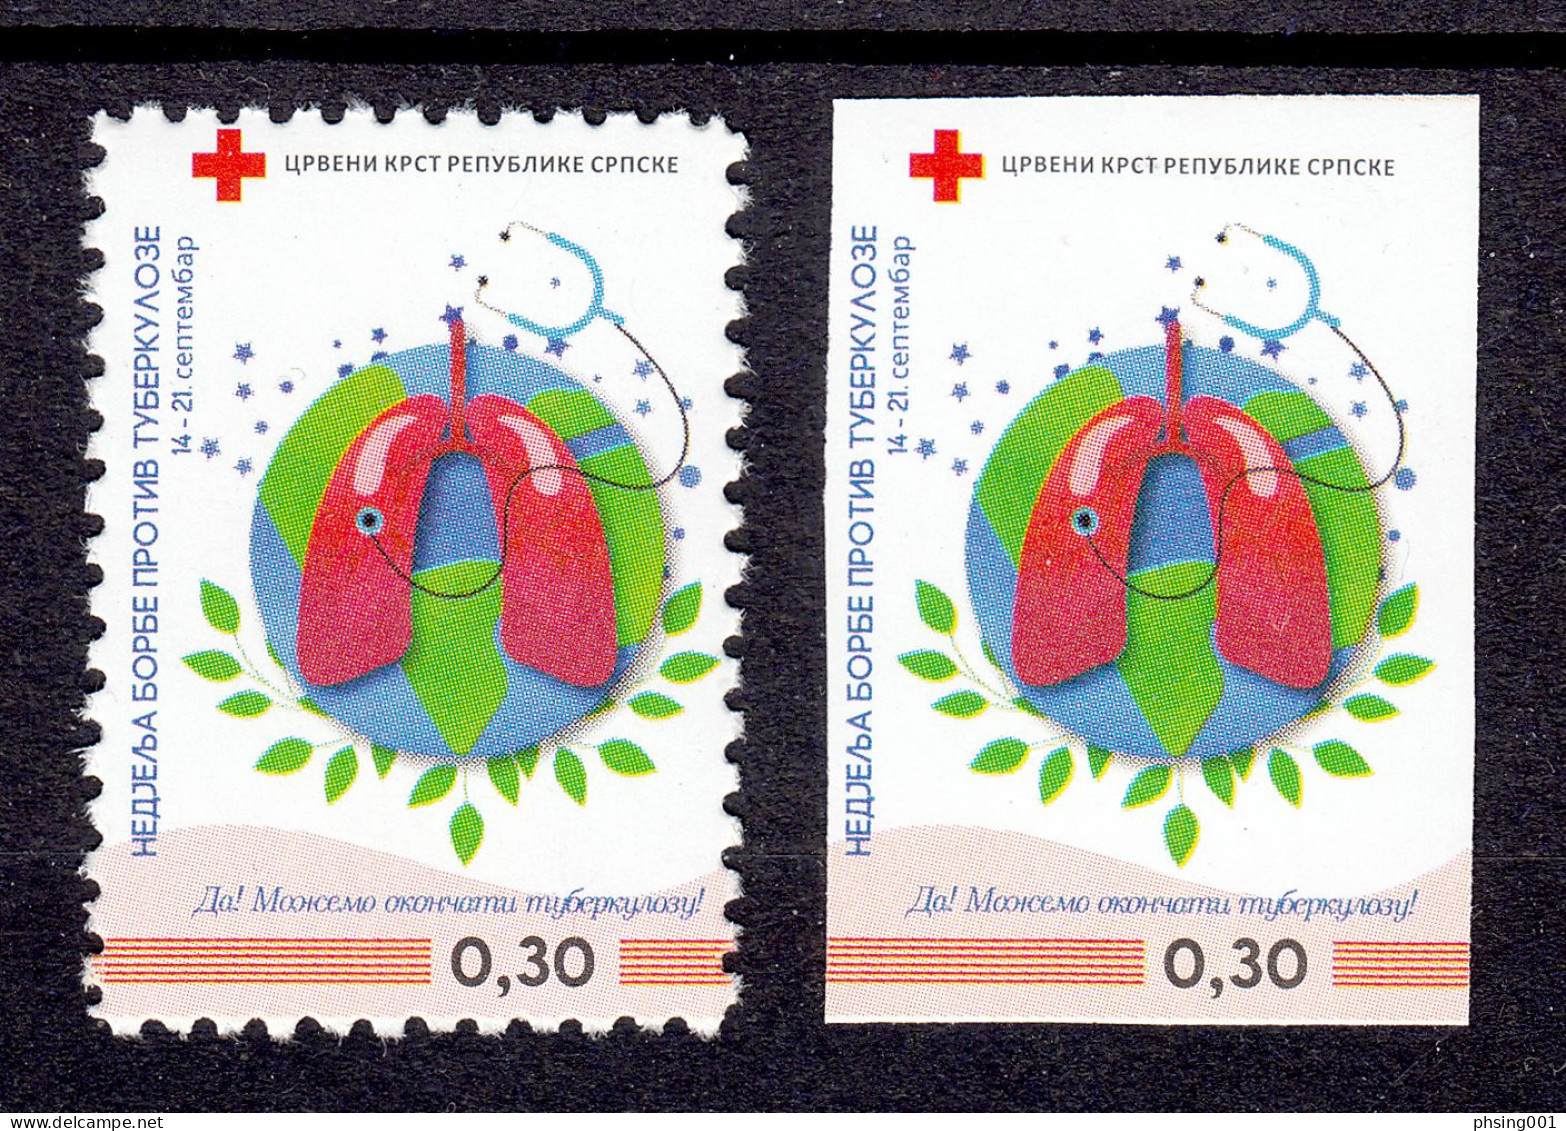 Bosnia Serbia 2023 TBC Red Cross Croix Rouge Rotes Kreuz Tax Charity Surcharge Perforated+imperforated Stamp MNH - Croix-Rouge